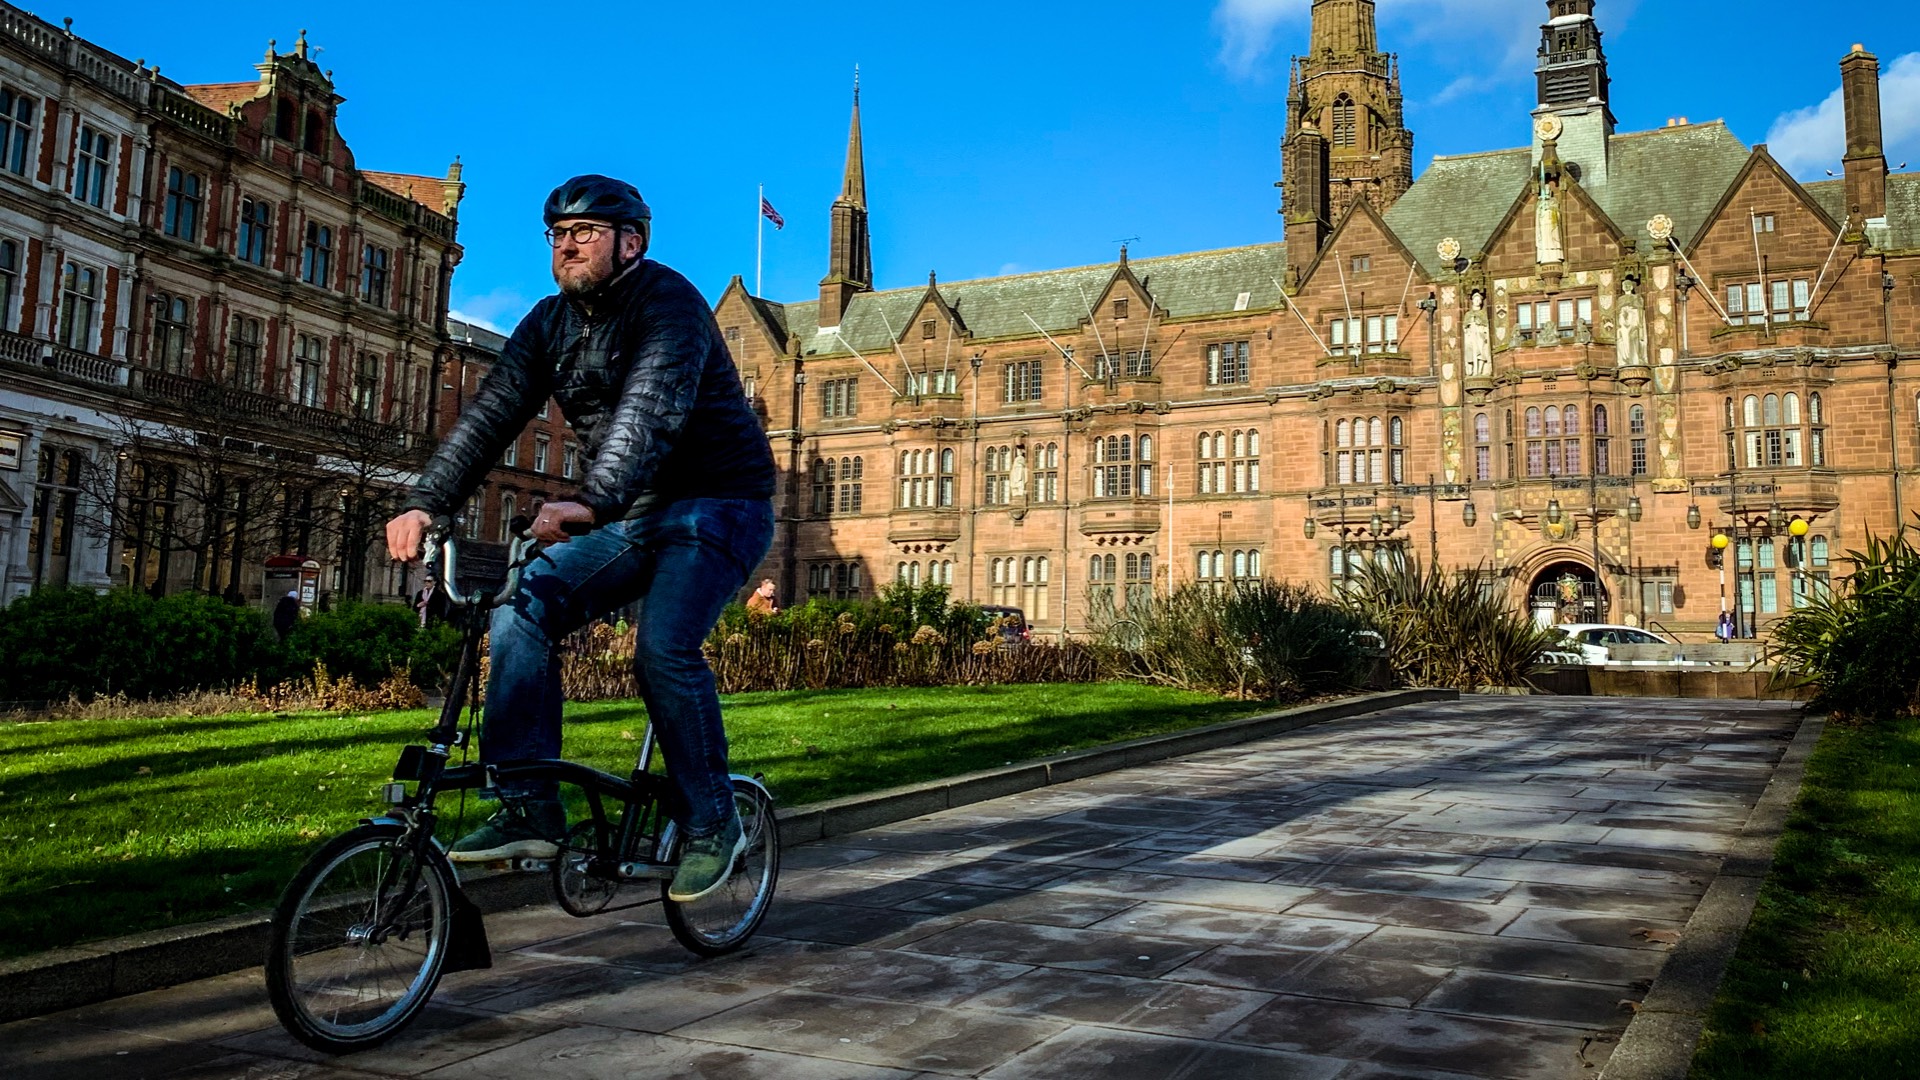 Coventry has appointed a Bicycle Mayor